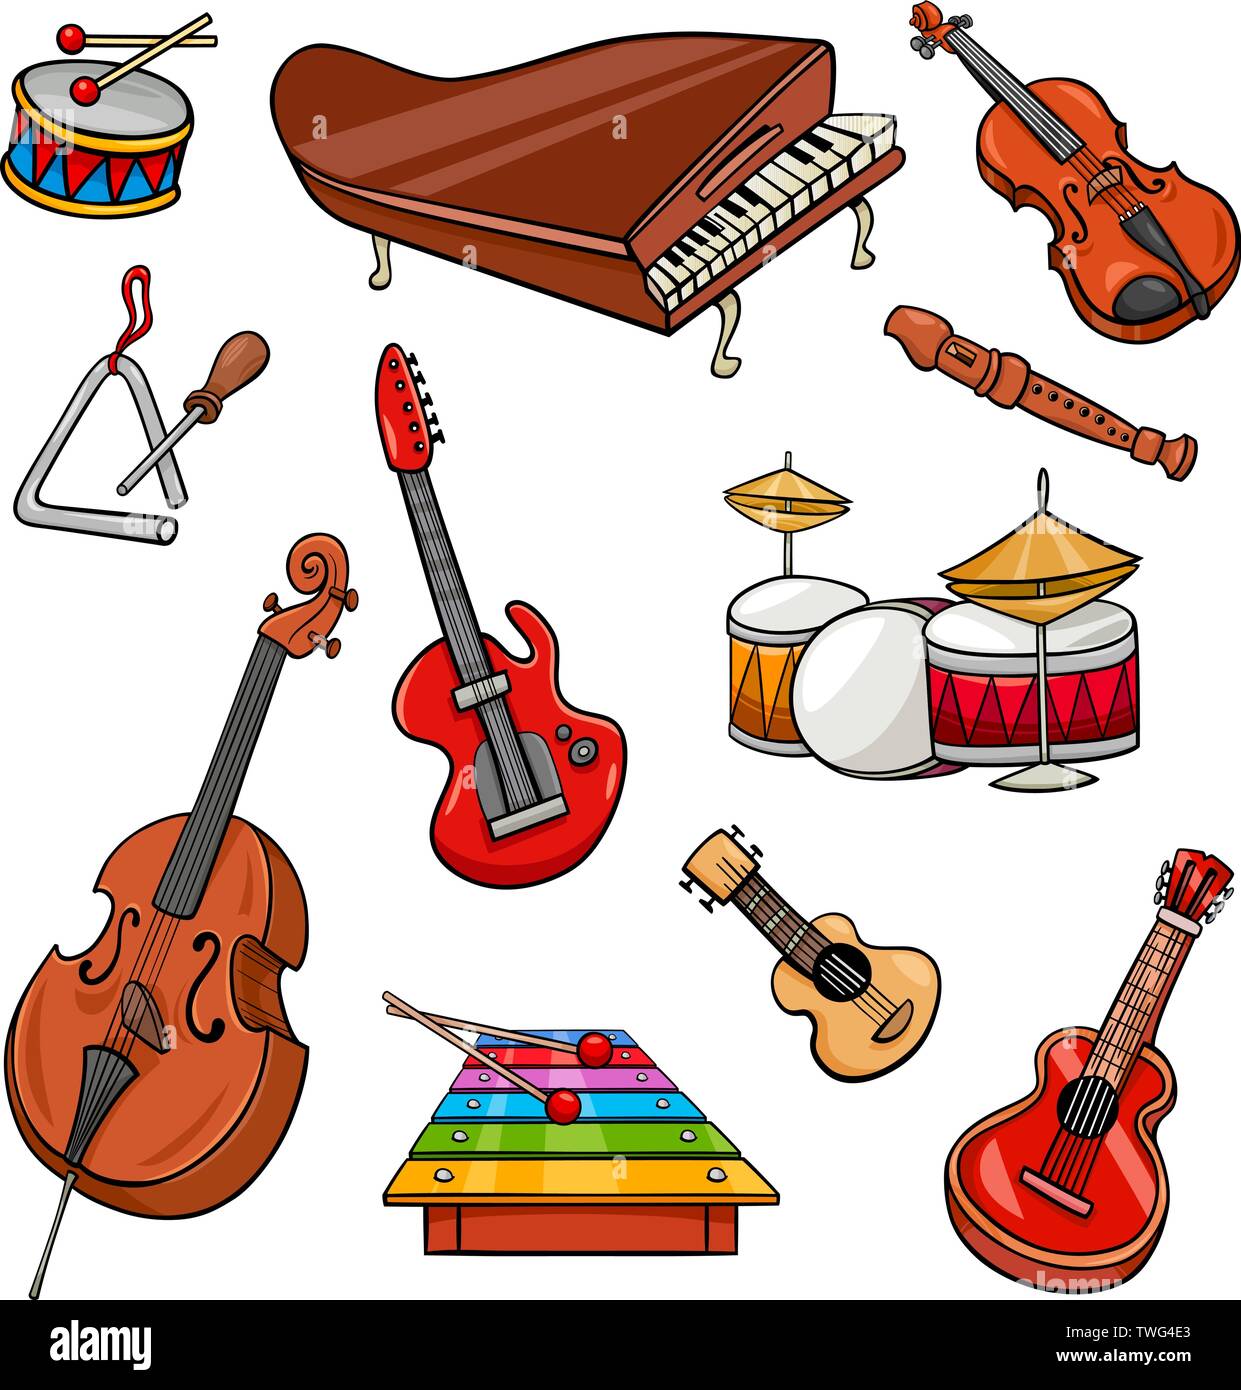 Cartoon Illustration of Musical Instruments Objects Clip Art Collection